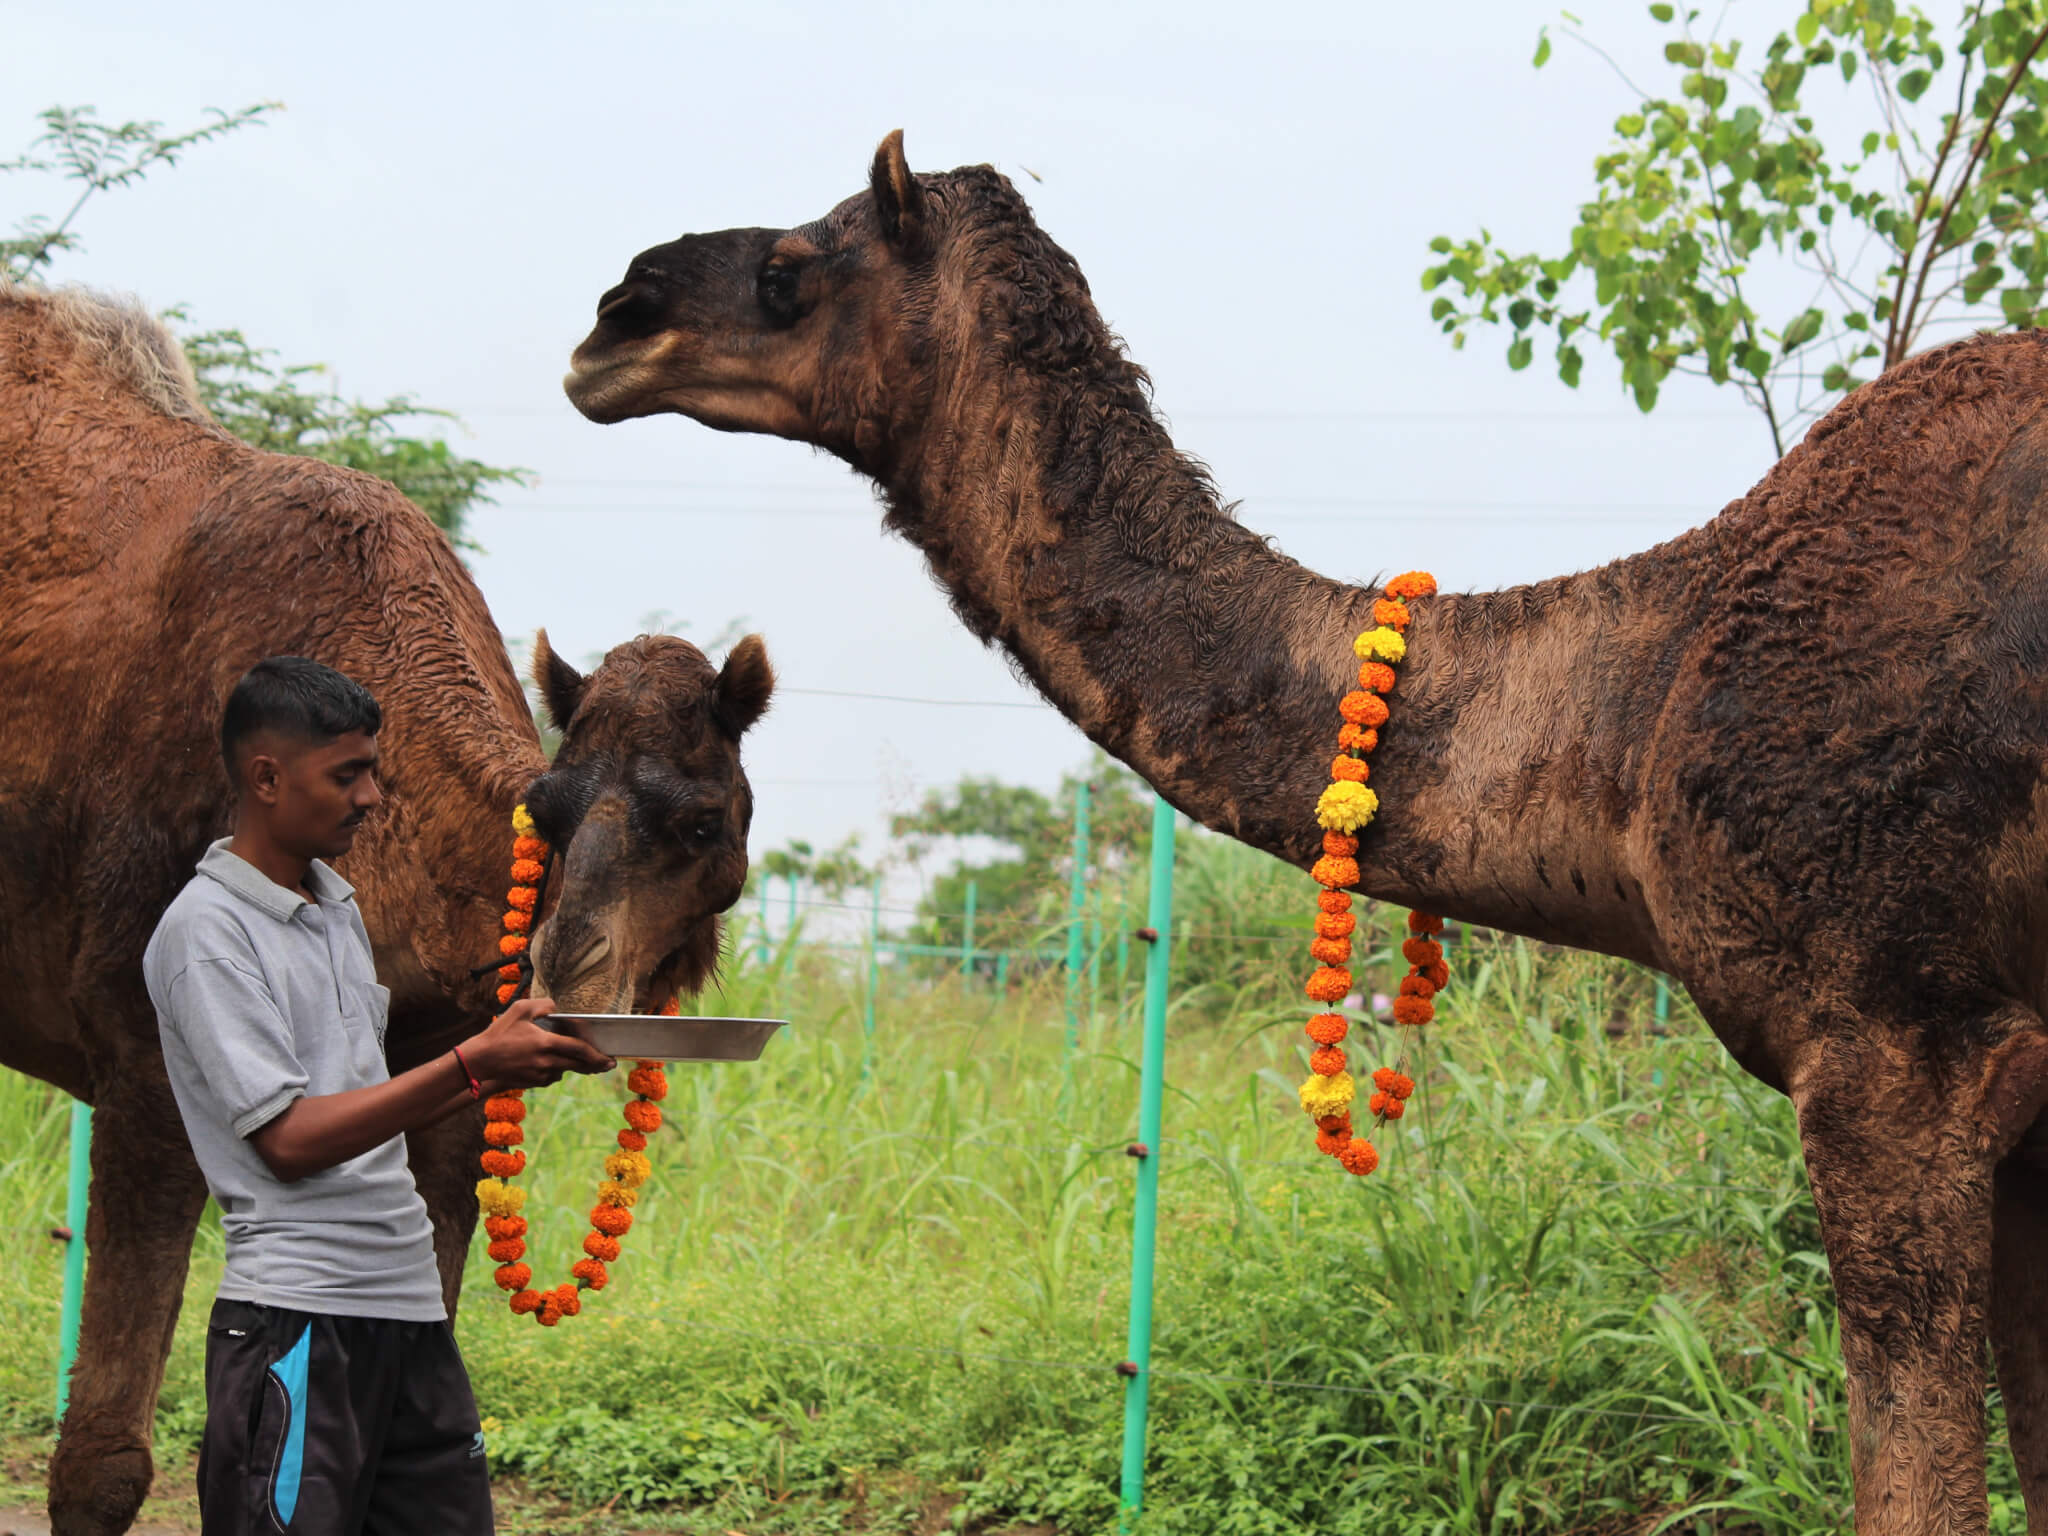 Two rescued camels politely take turns eating from the plate of fruits offered by a staff member.